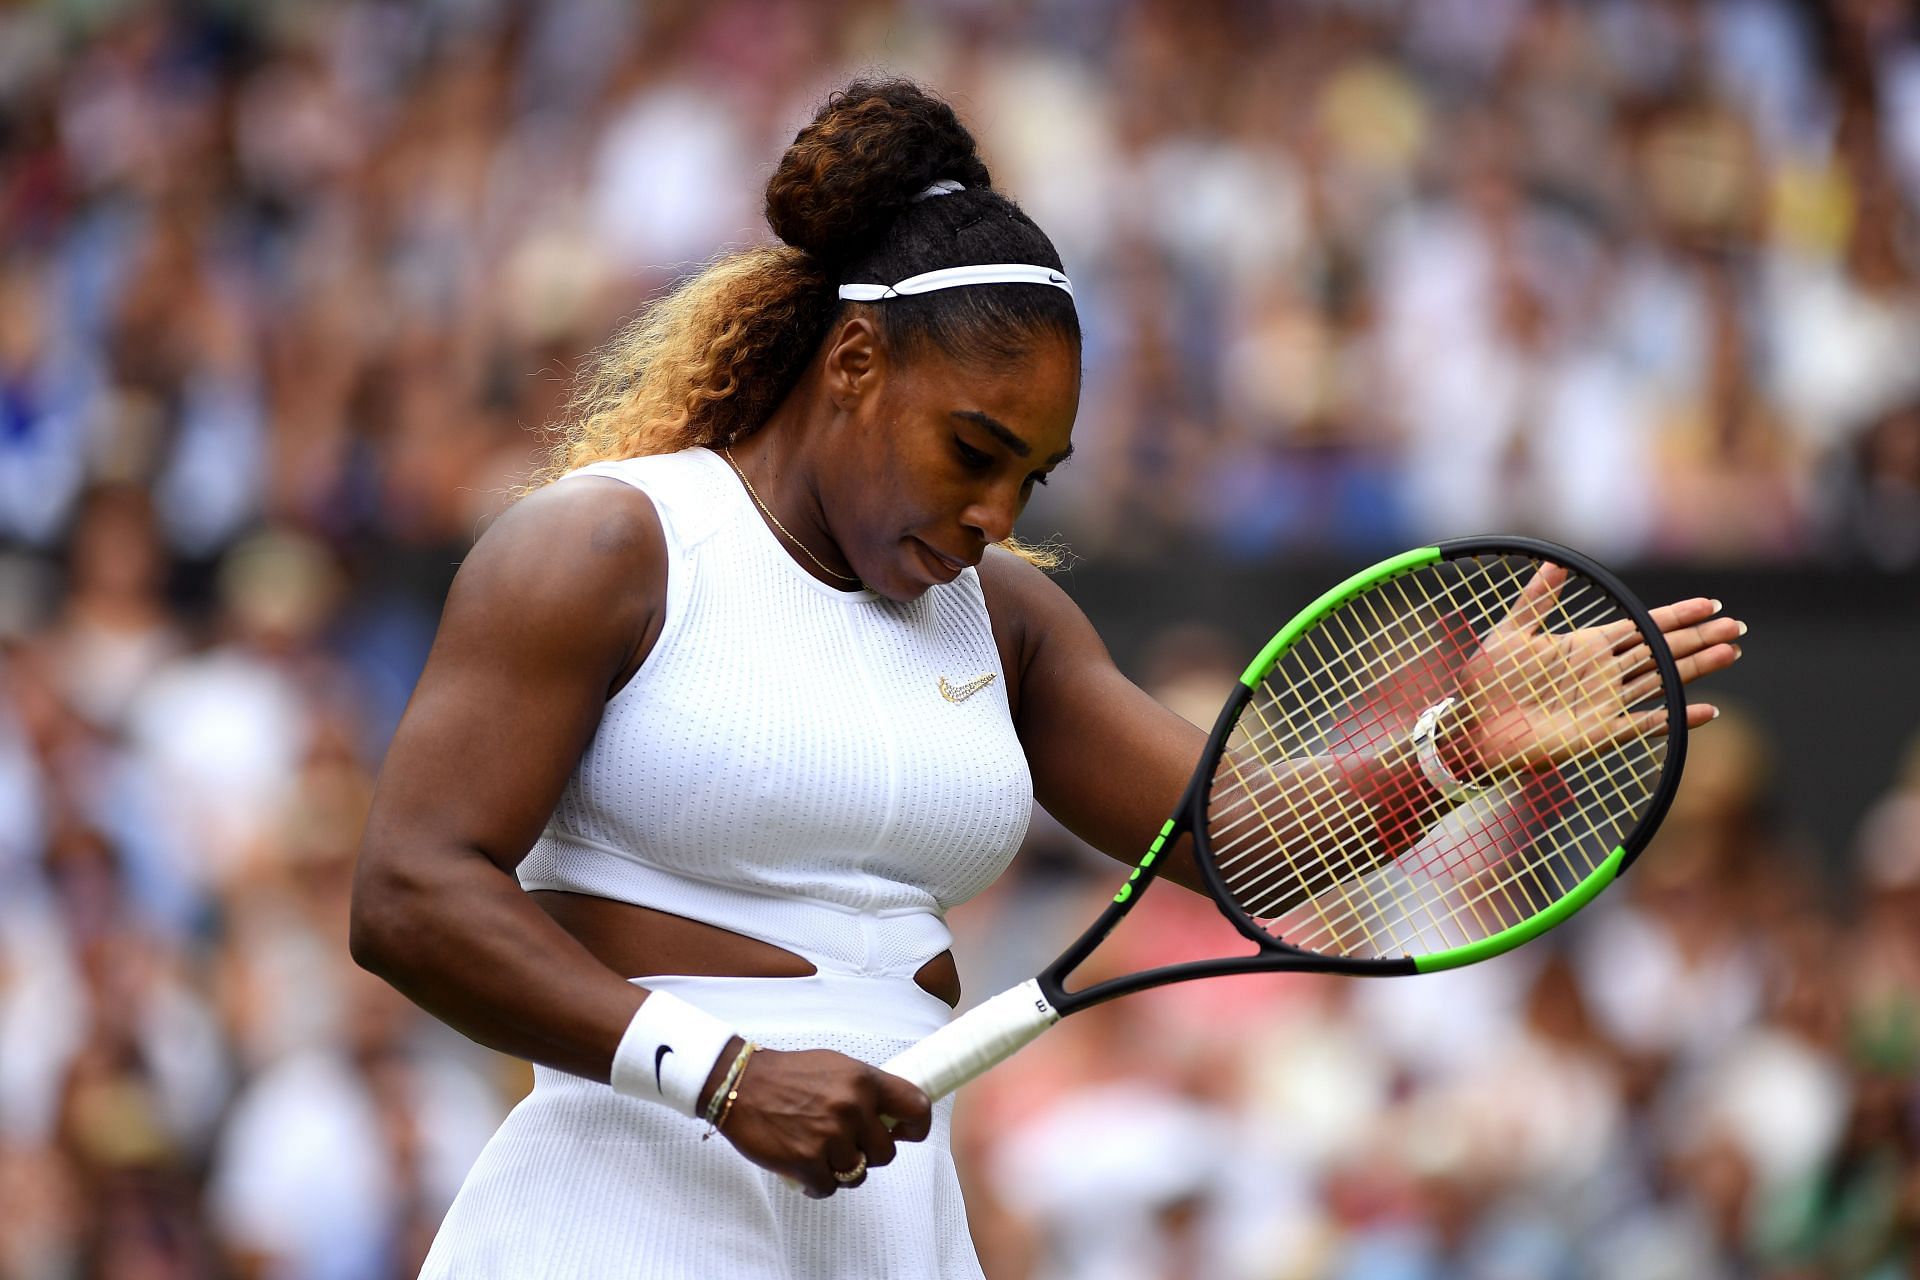 Serena Williams is back in training, hoping to grace the tennis courts once again for her fans